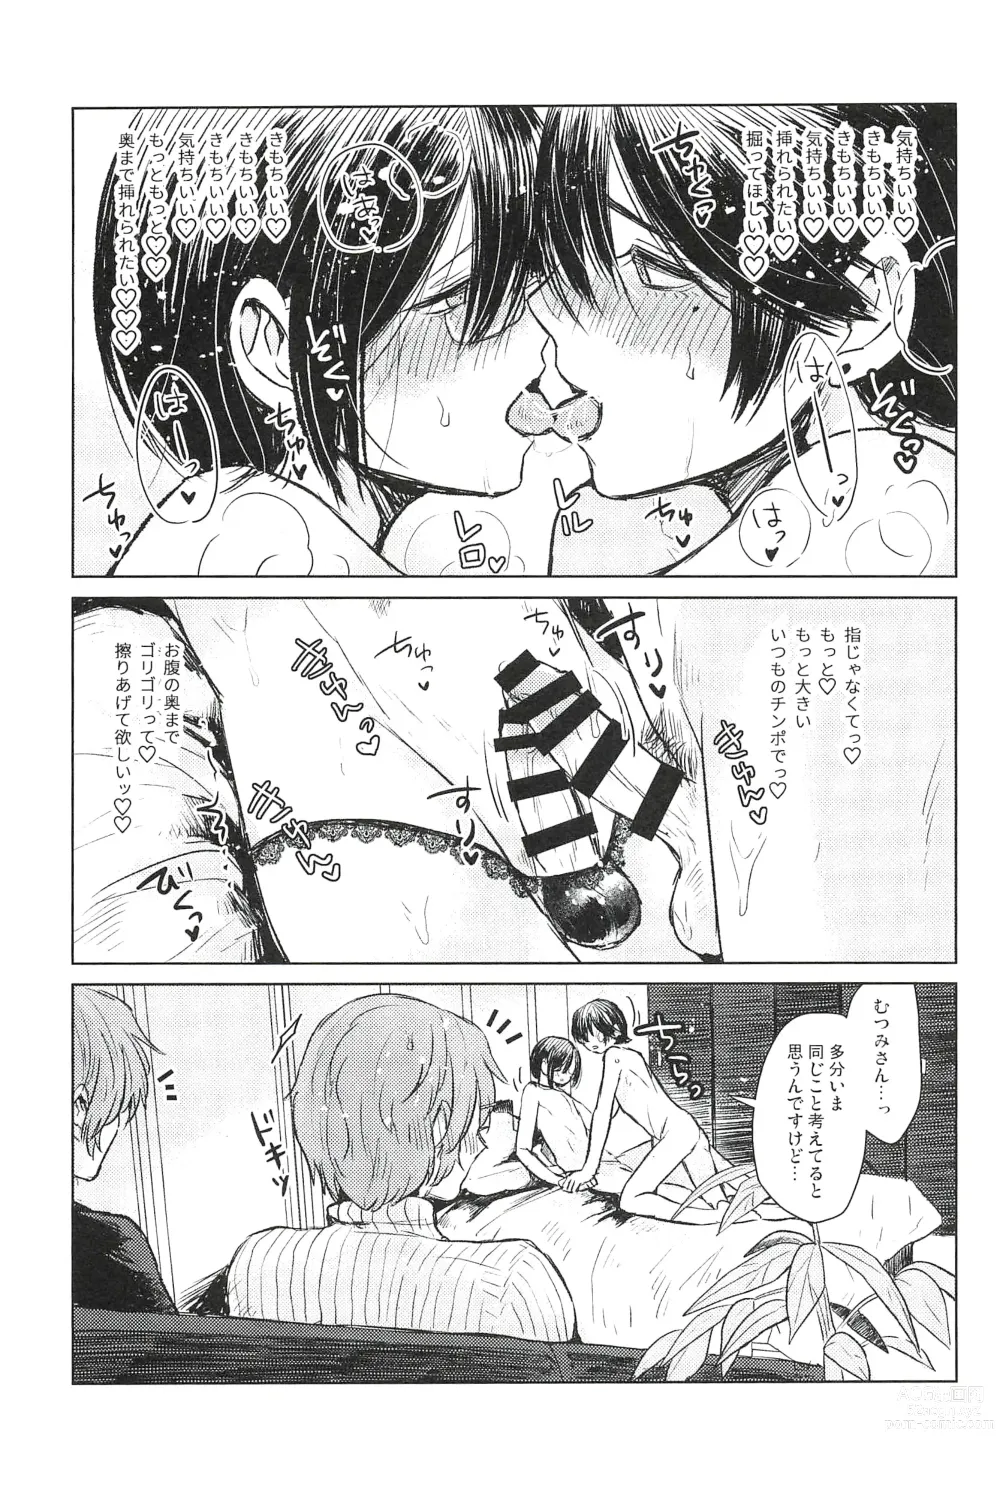 Page 19 of doujinshi ONE MORE 4P